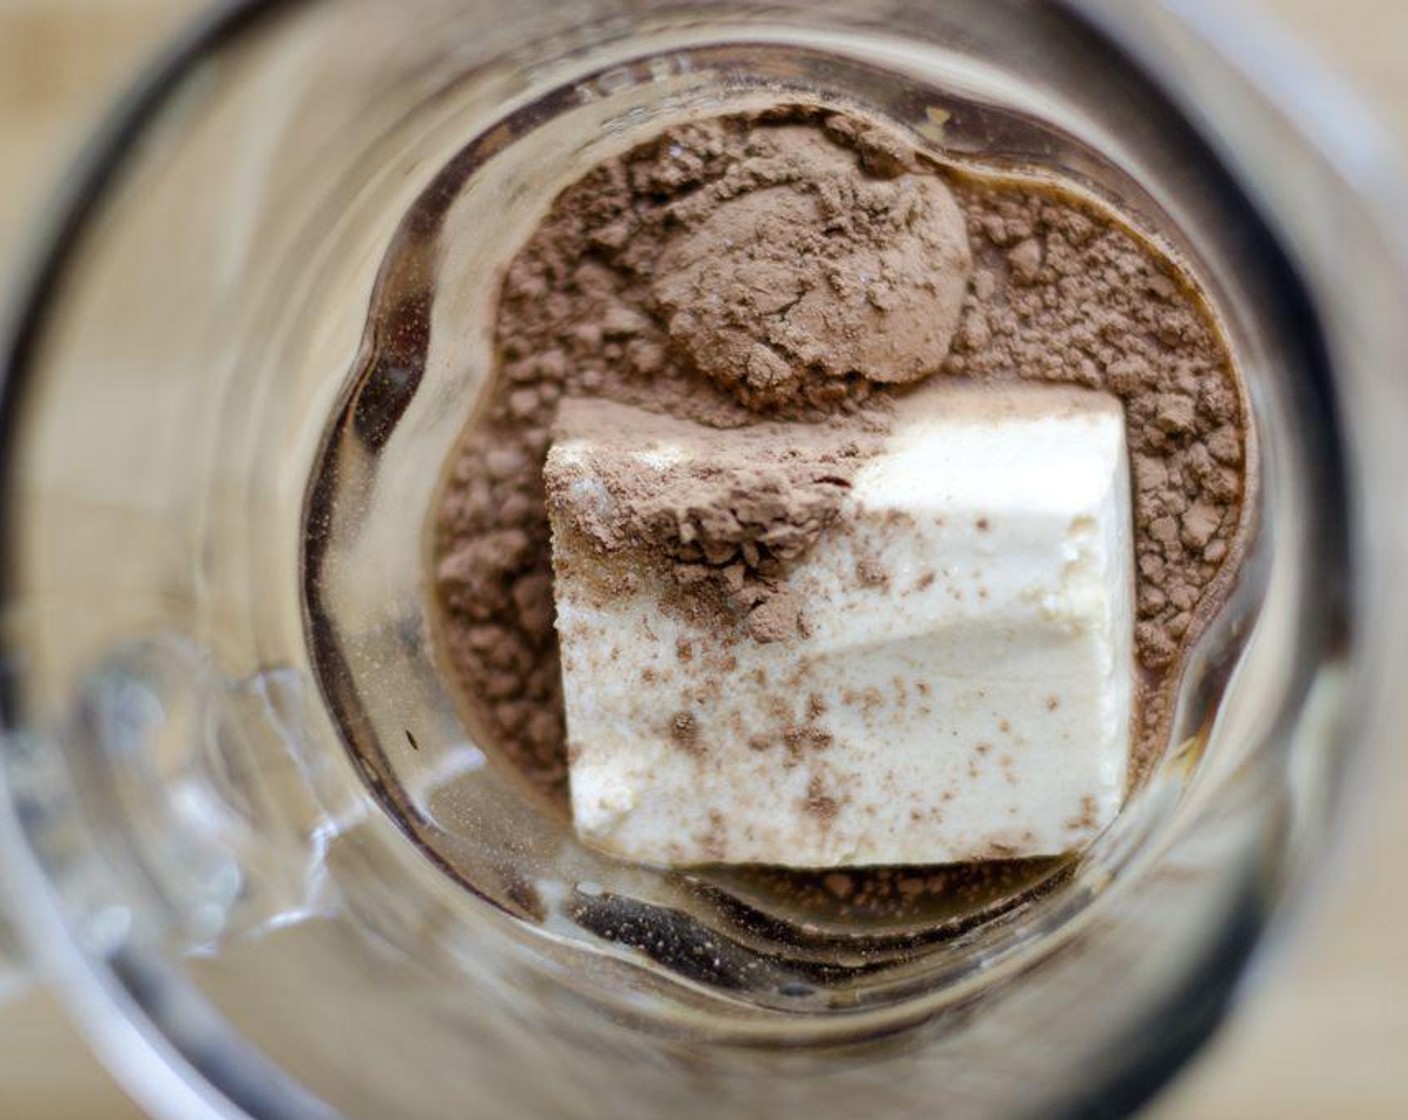 step 2 Combine coffee, Silken Tofu (1 cup), Dark Brown Sugar (1 Tbsp), Vanilla Extract (1/2 tsp), Unsweetened Cocoa Powder (2 Tbsp), and Ice (1 1/2 cups) in a blender until smooth, adding more ice to reach the consistency of your liking.